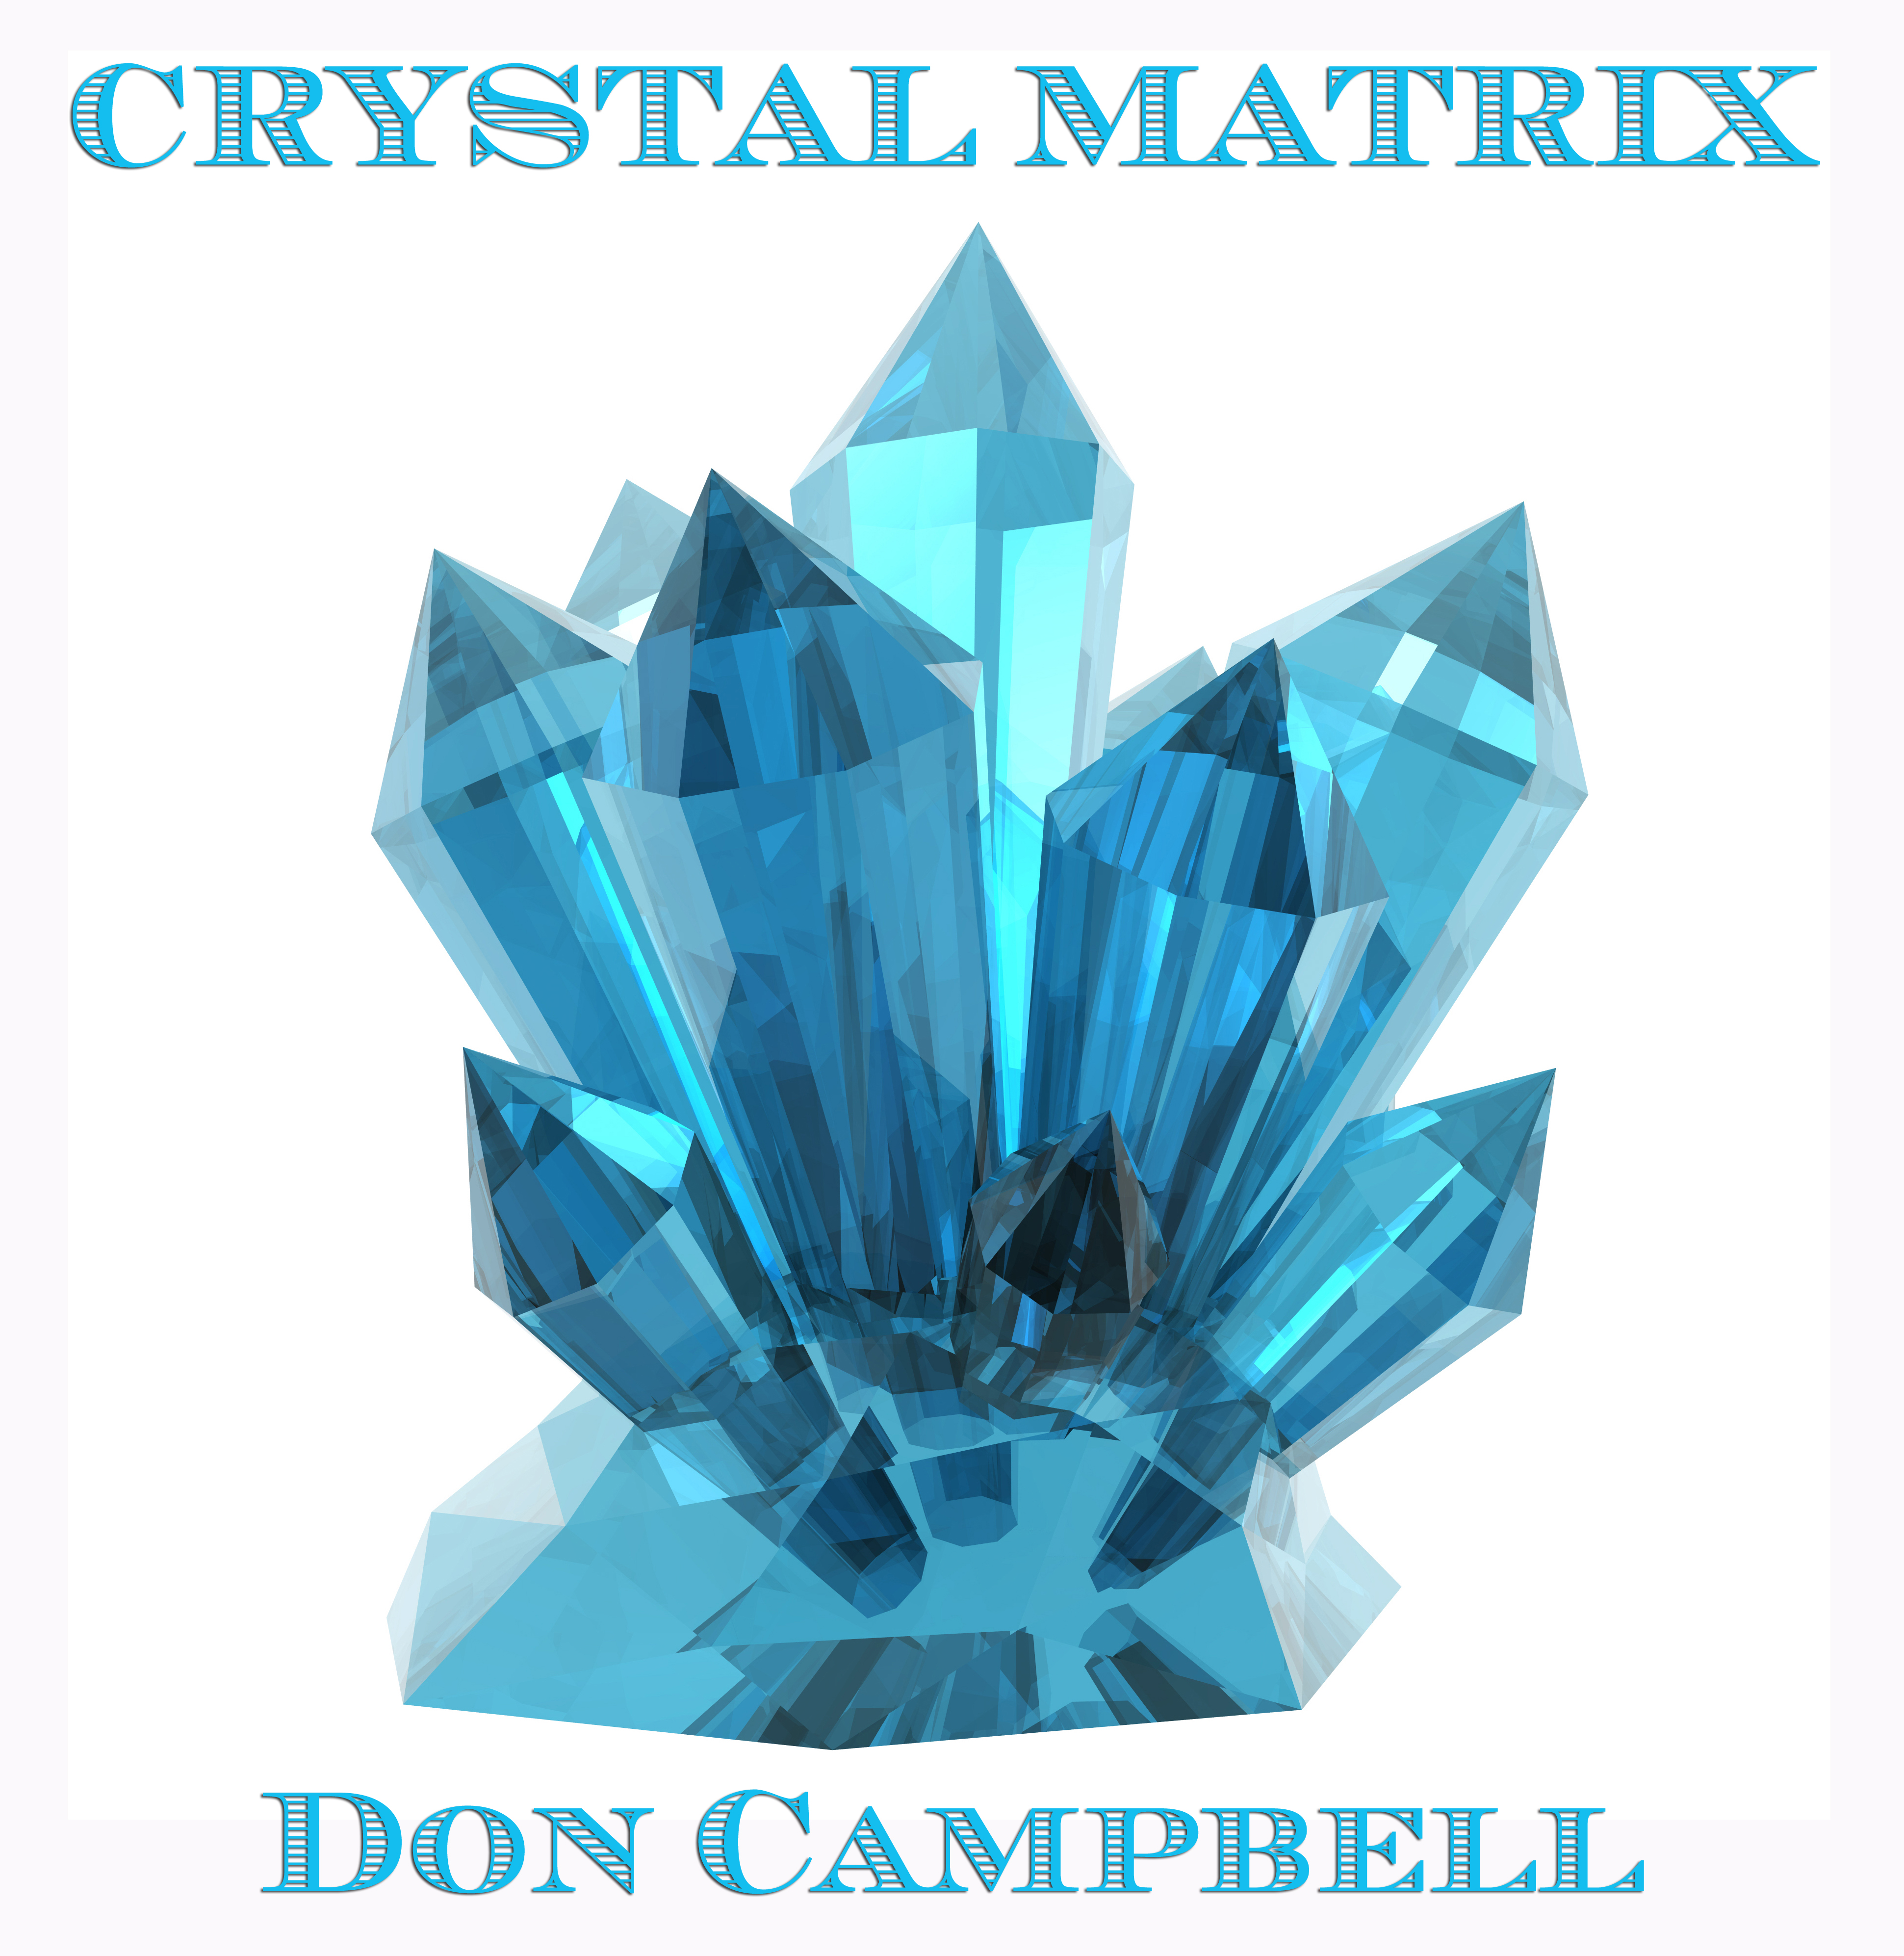 World Sound Healing Day Special Presentation: “CRYSTAL MATRIX” by Don Campbell